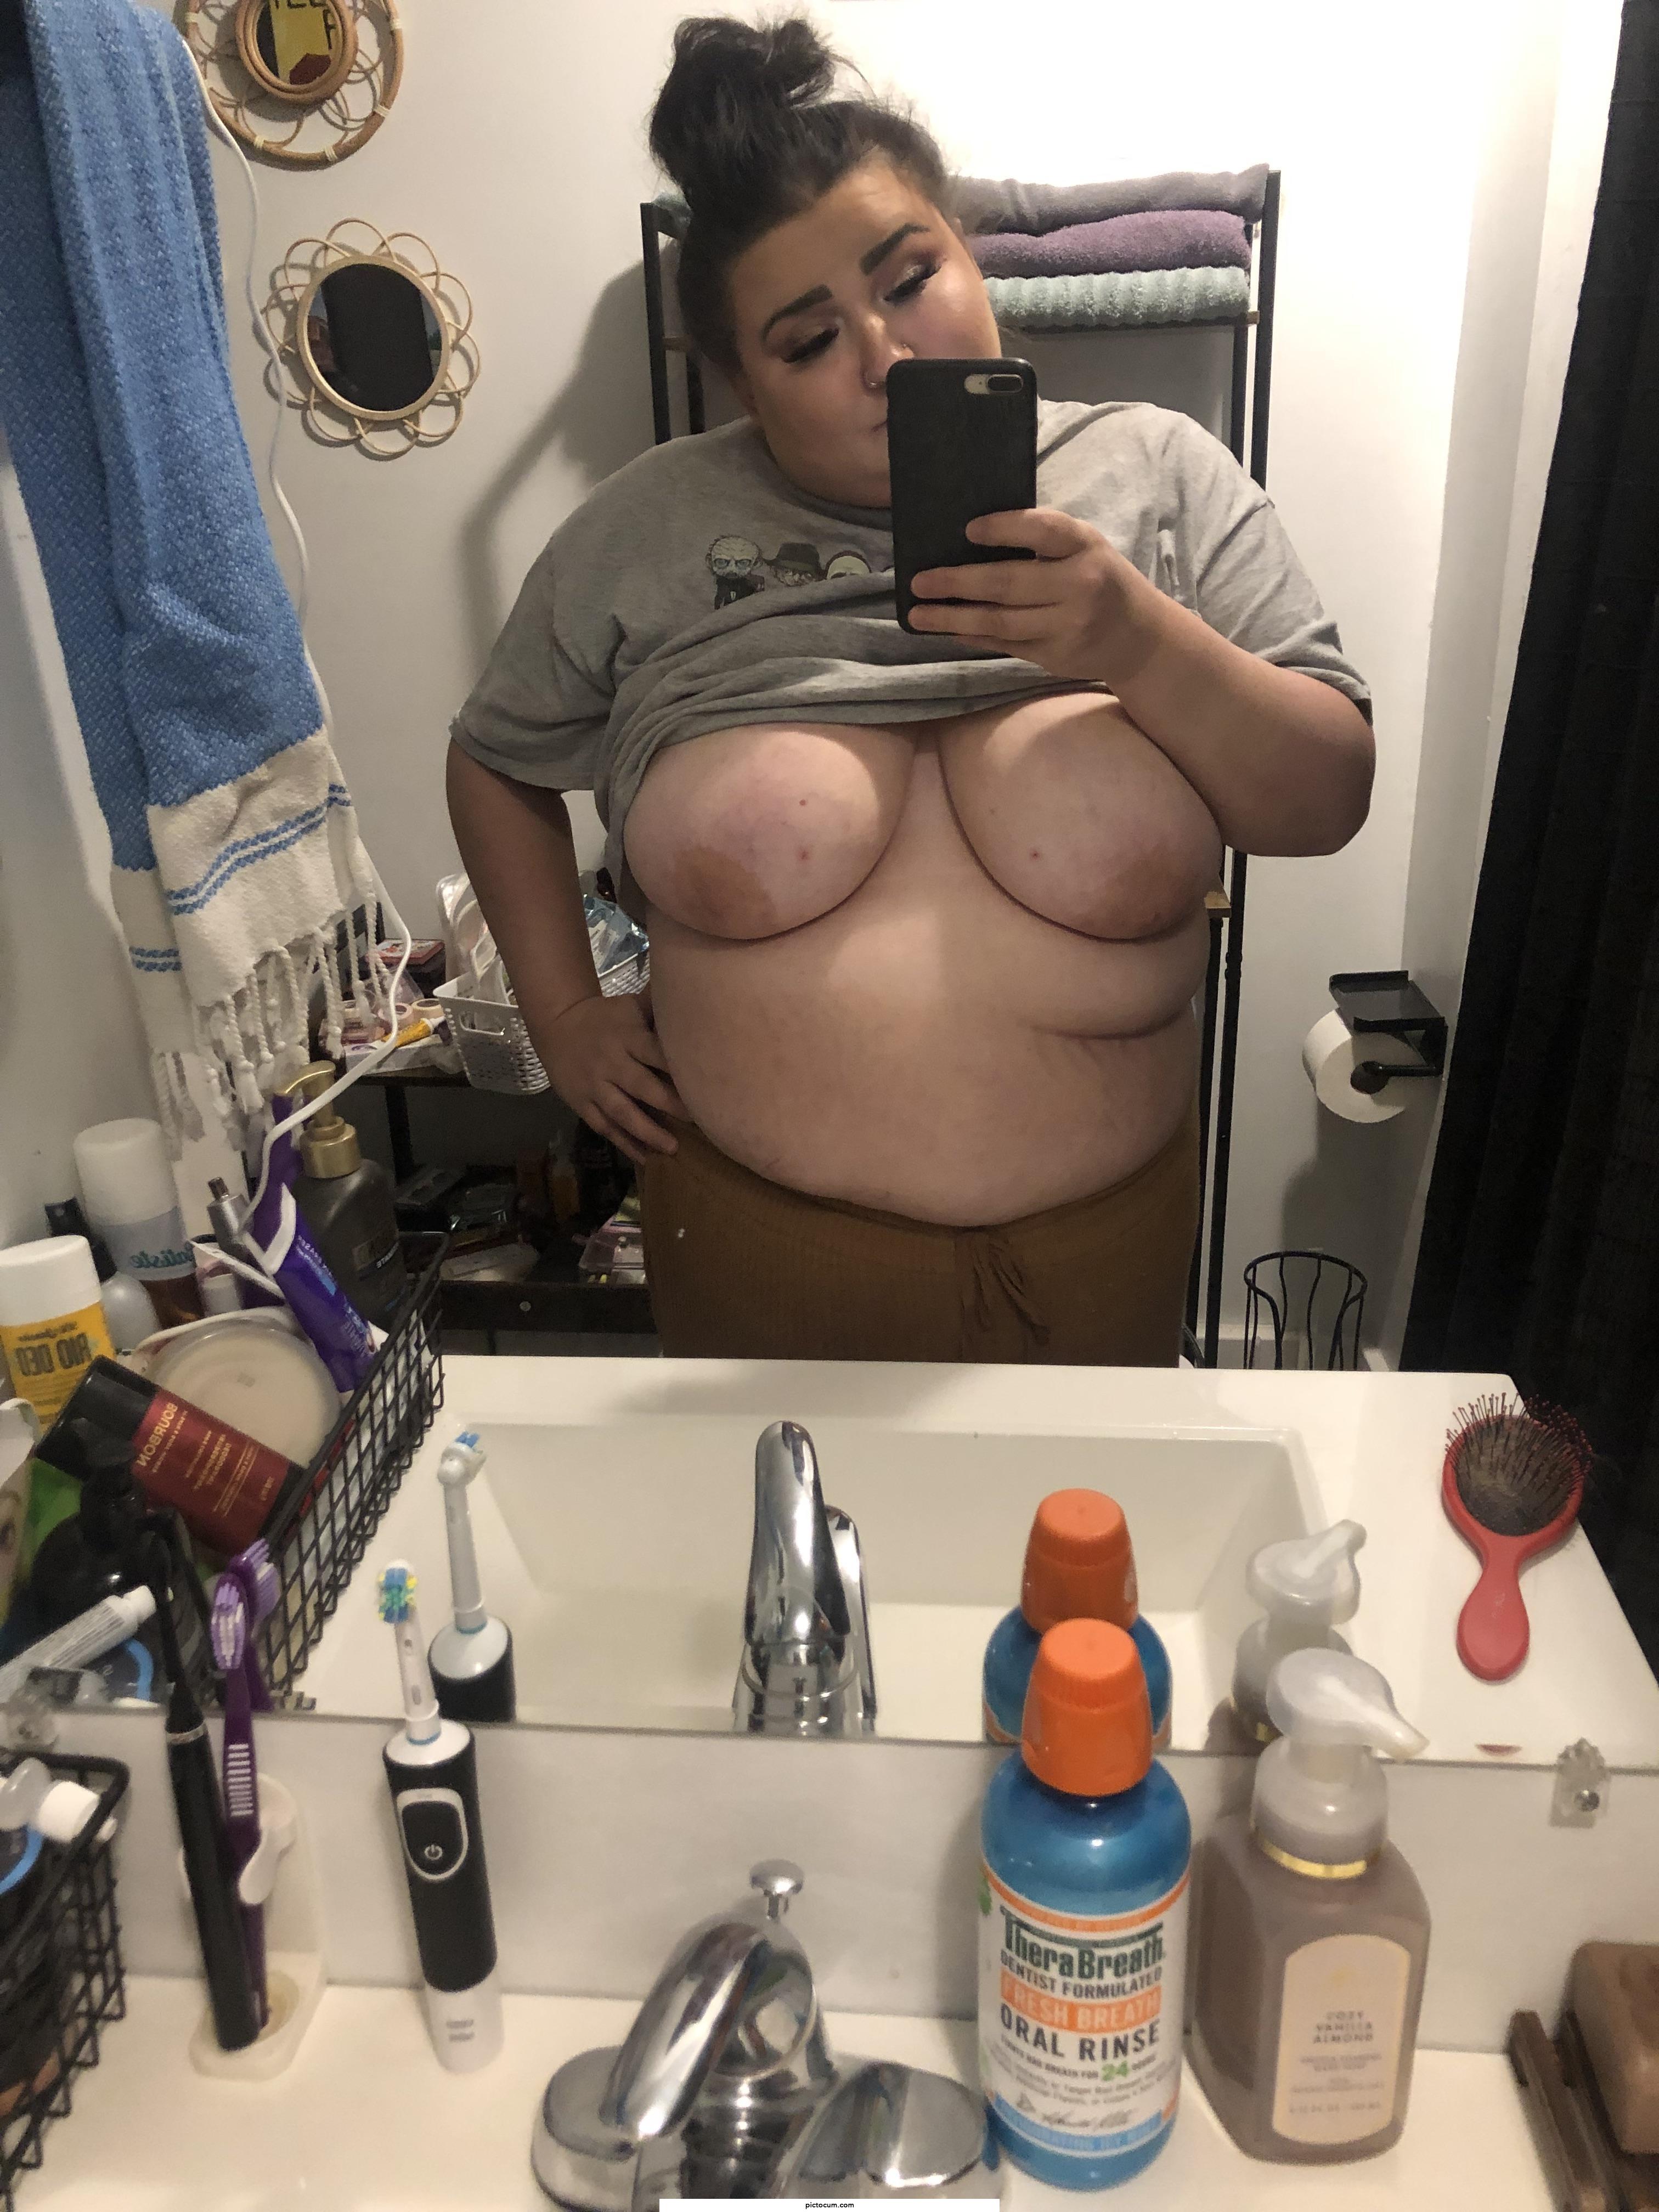 Come hang out. Devwit23bbw